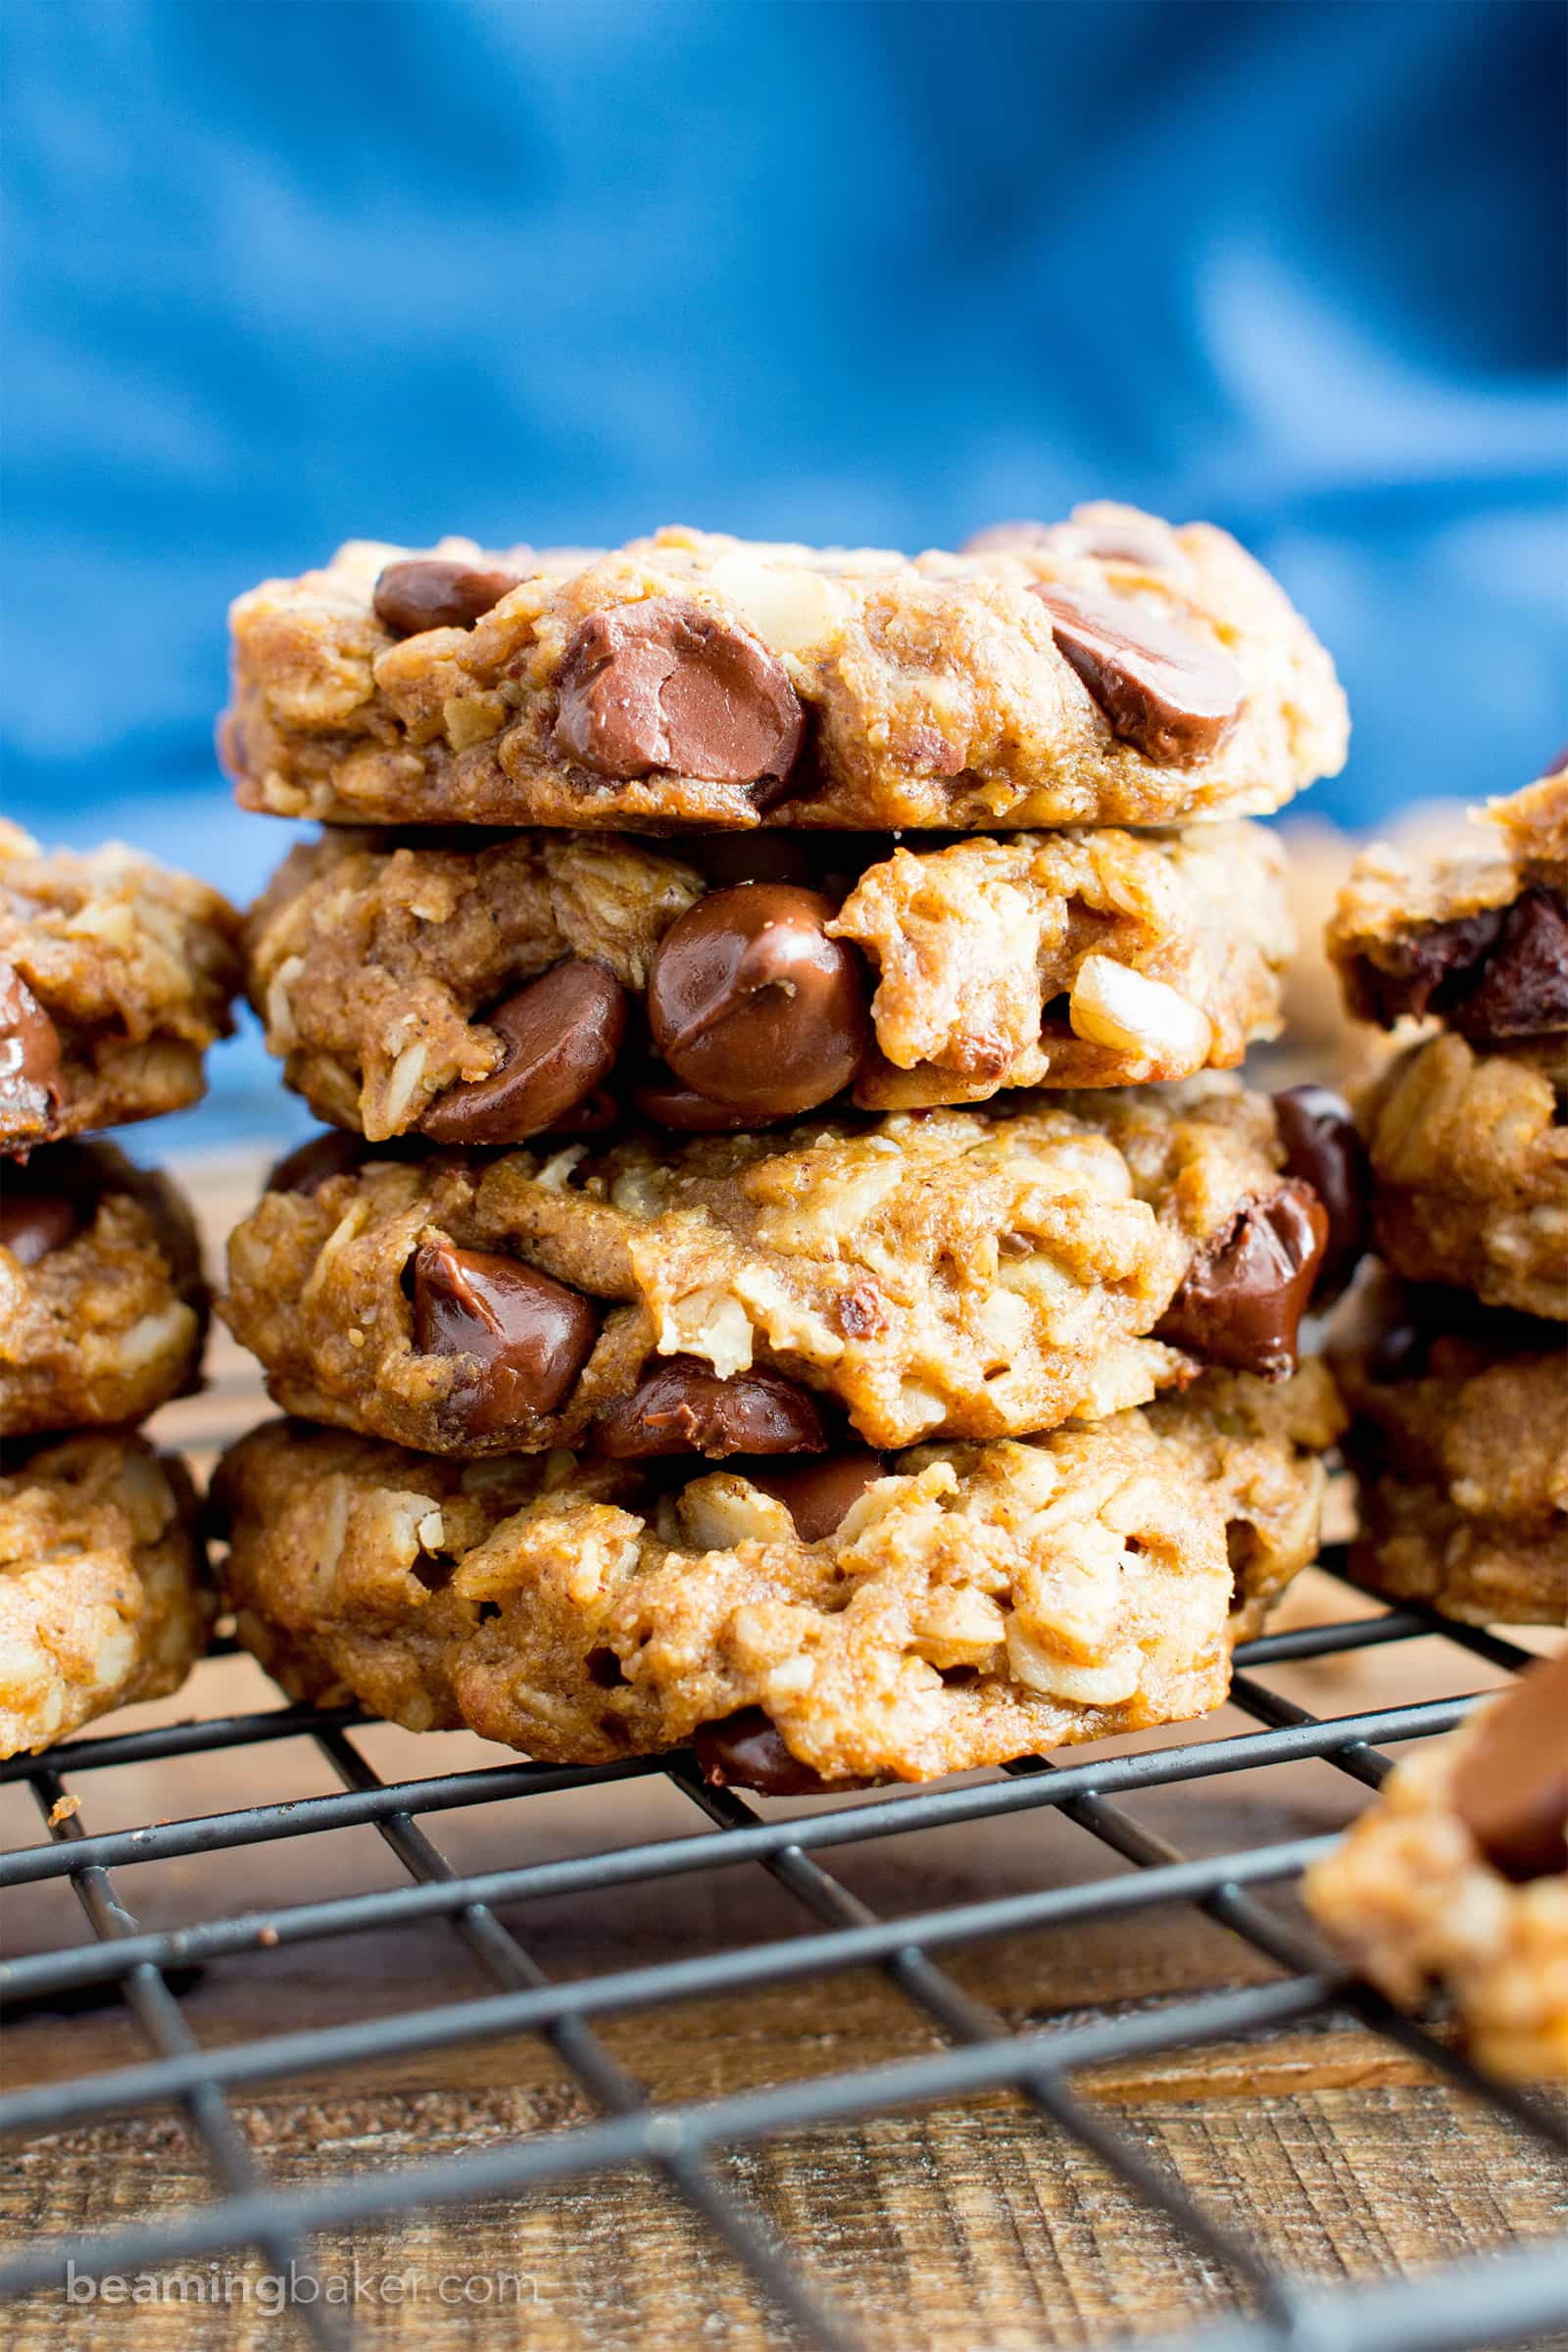 Gluten Free Dairy Free Oatmeal Cookies
 Easy Gluten Free Peanut Butter Chocolate Chip Oatmeal